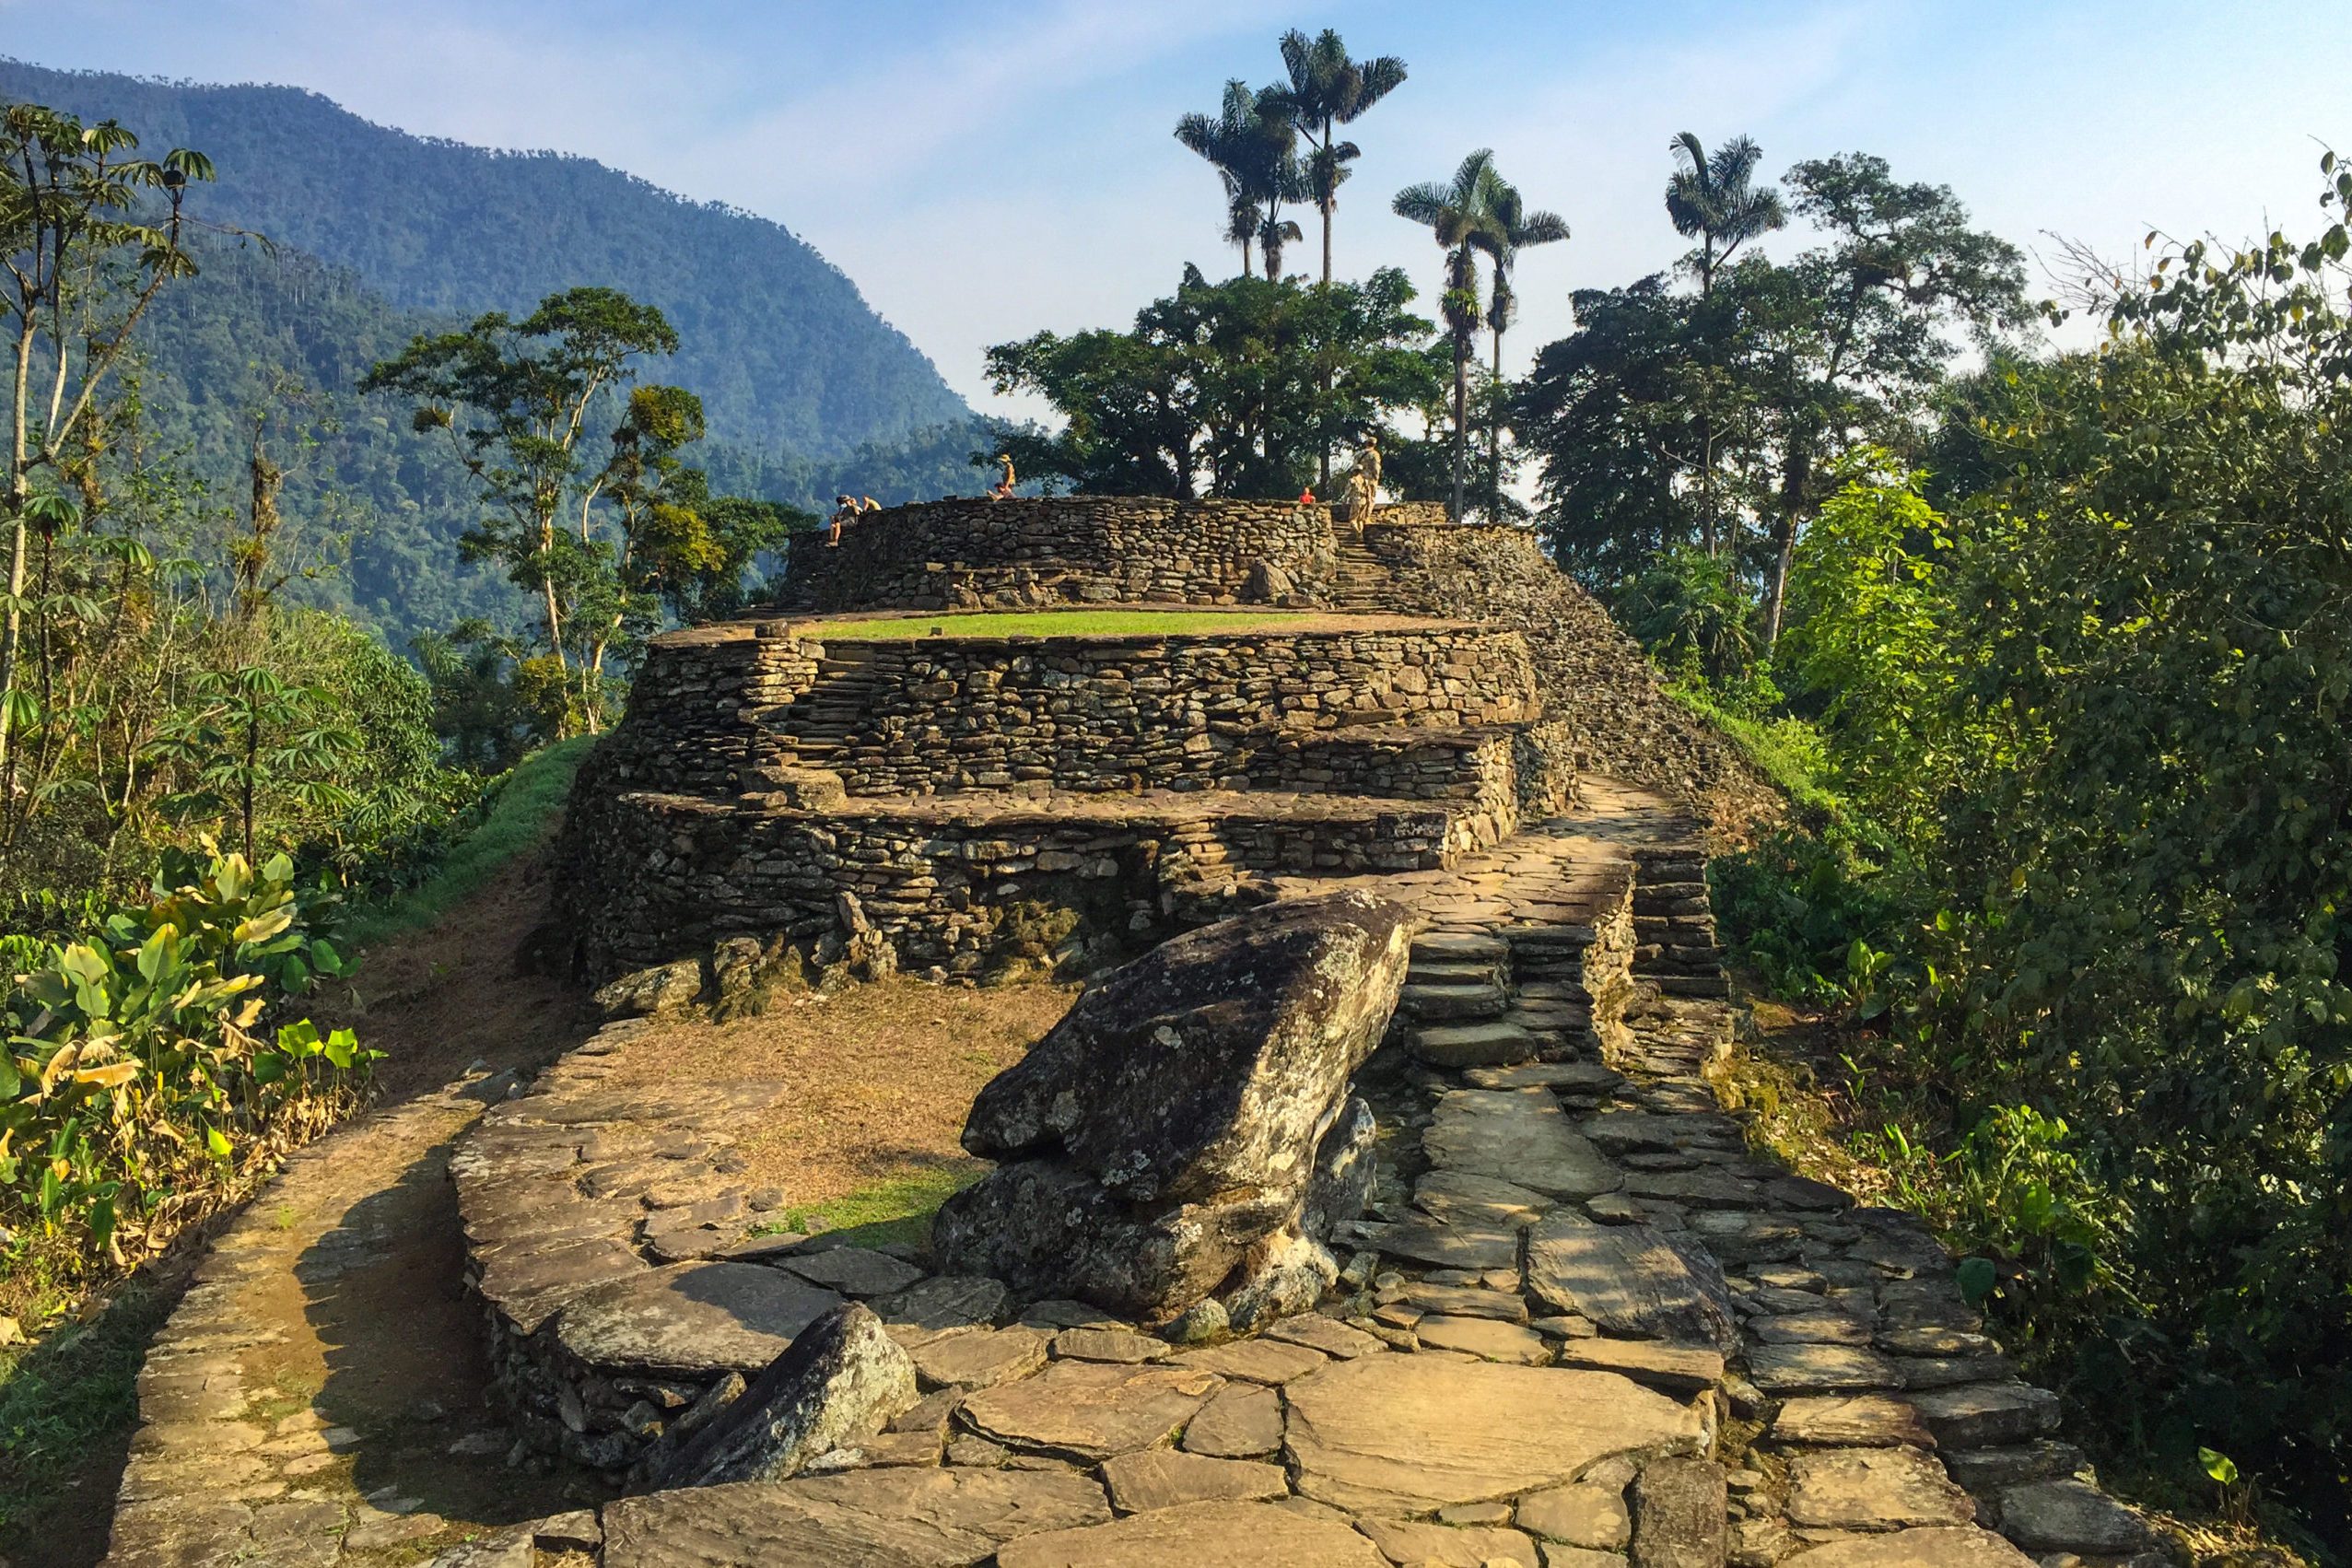 The Famous and Tourist Tayrona Park, the Ciudad Perdida (Lost City) in Magdalena / Colombia, full of Nature, Vegetation, History and Culture